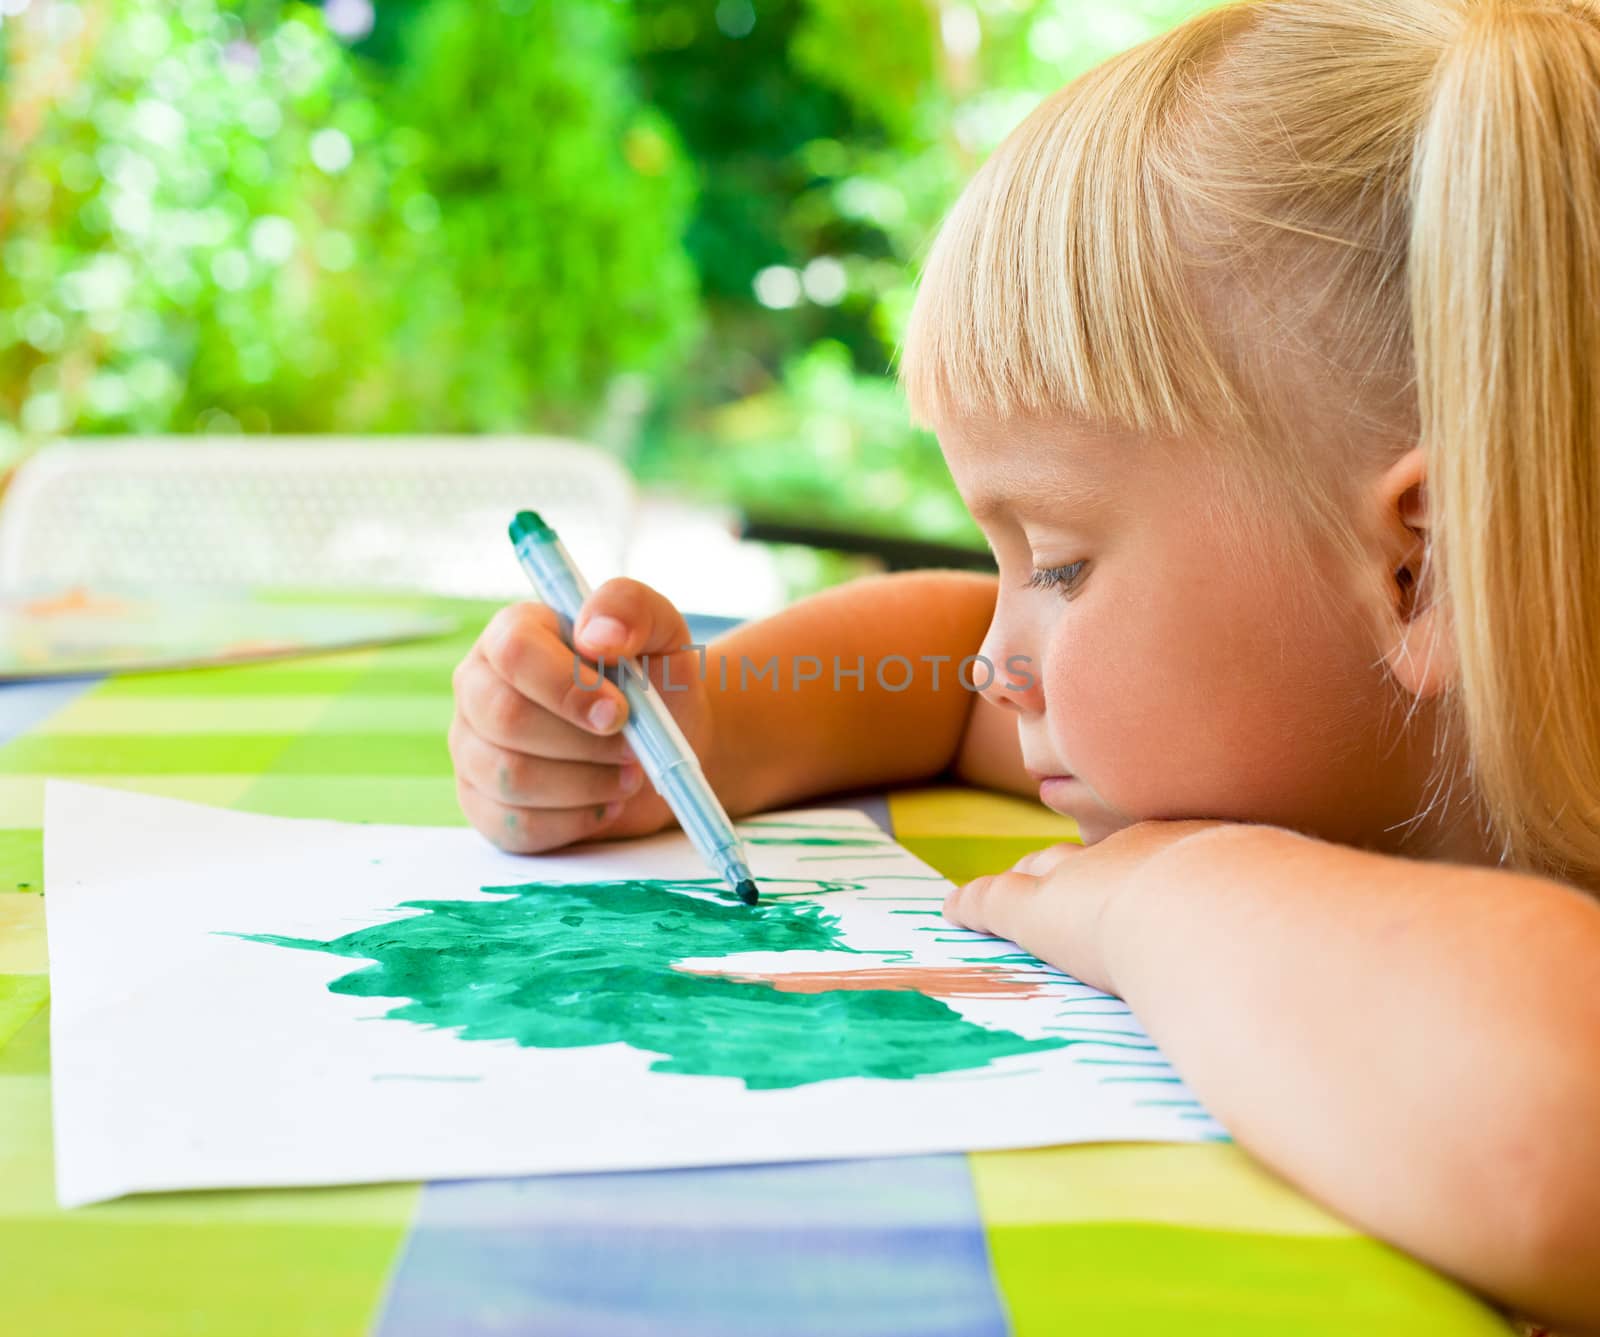 Cute 4 year old girl sitting at table drawing